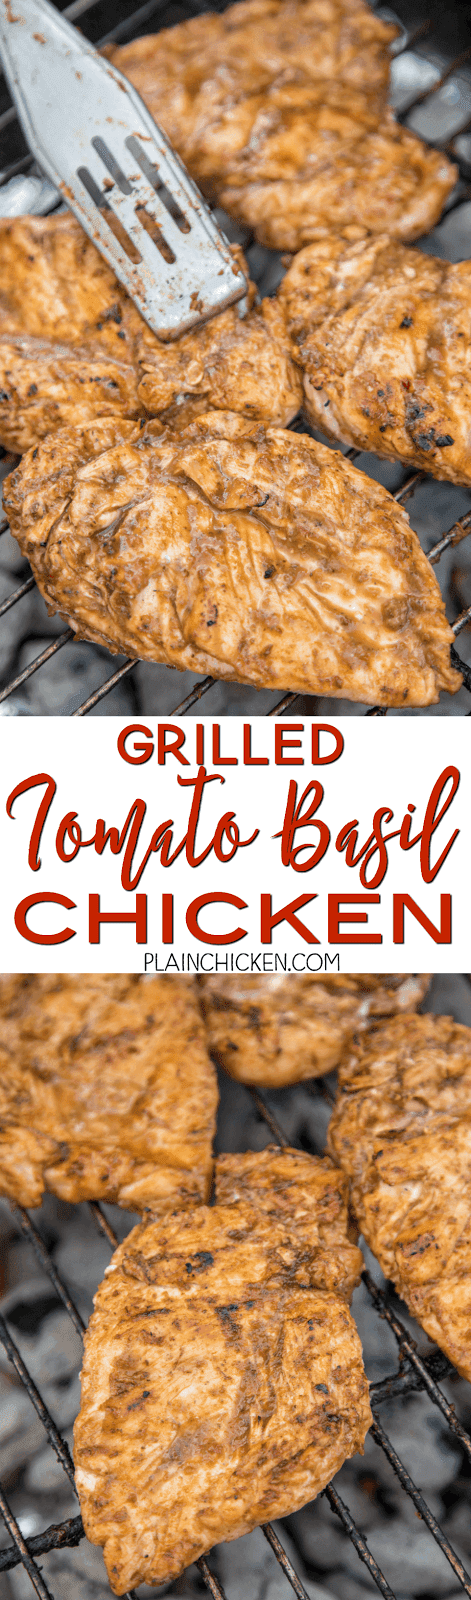 Grilled Tomato Basil Chicken - chicken breast marinated in fresh tomatoes, fresh basil, balsamic vinegar and garlic. This chicken is CRAZY good!!! Great on its own or served on top of pasta. SO much flavor is packed into this easy grilled chicken recipe! Everyone RAVES about this chicken!!